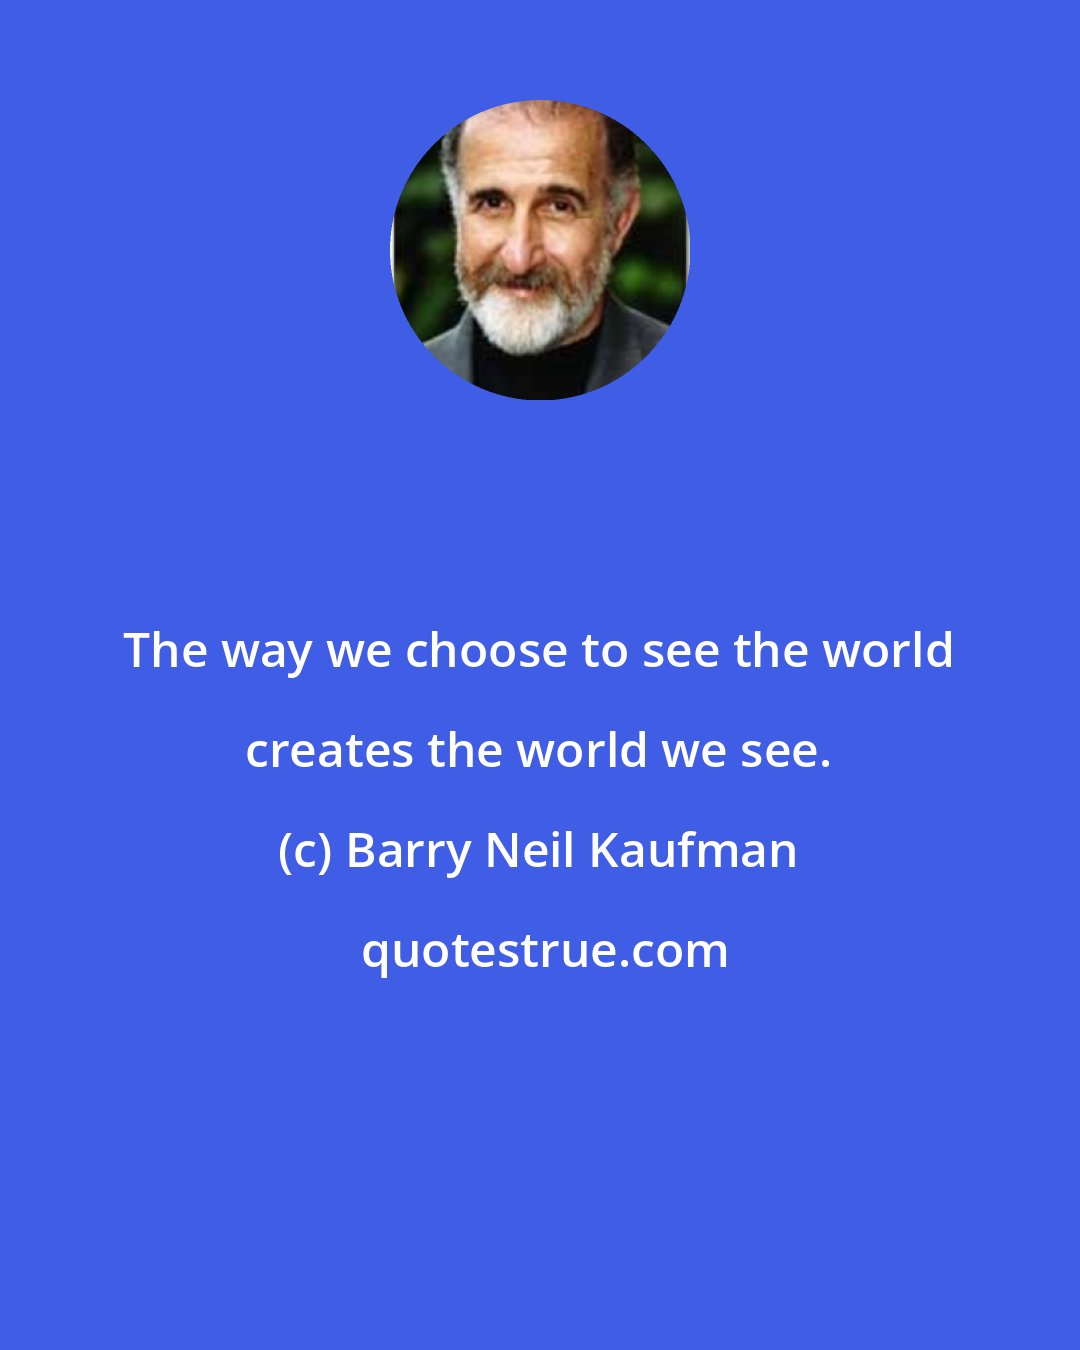 Barry Neil Kaufman: The way we choose to see the world creates the world we see.